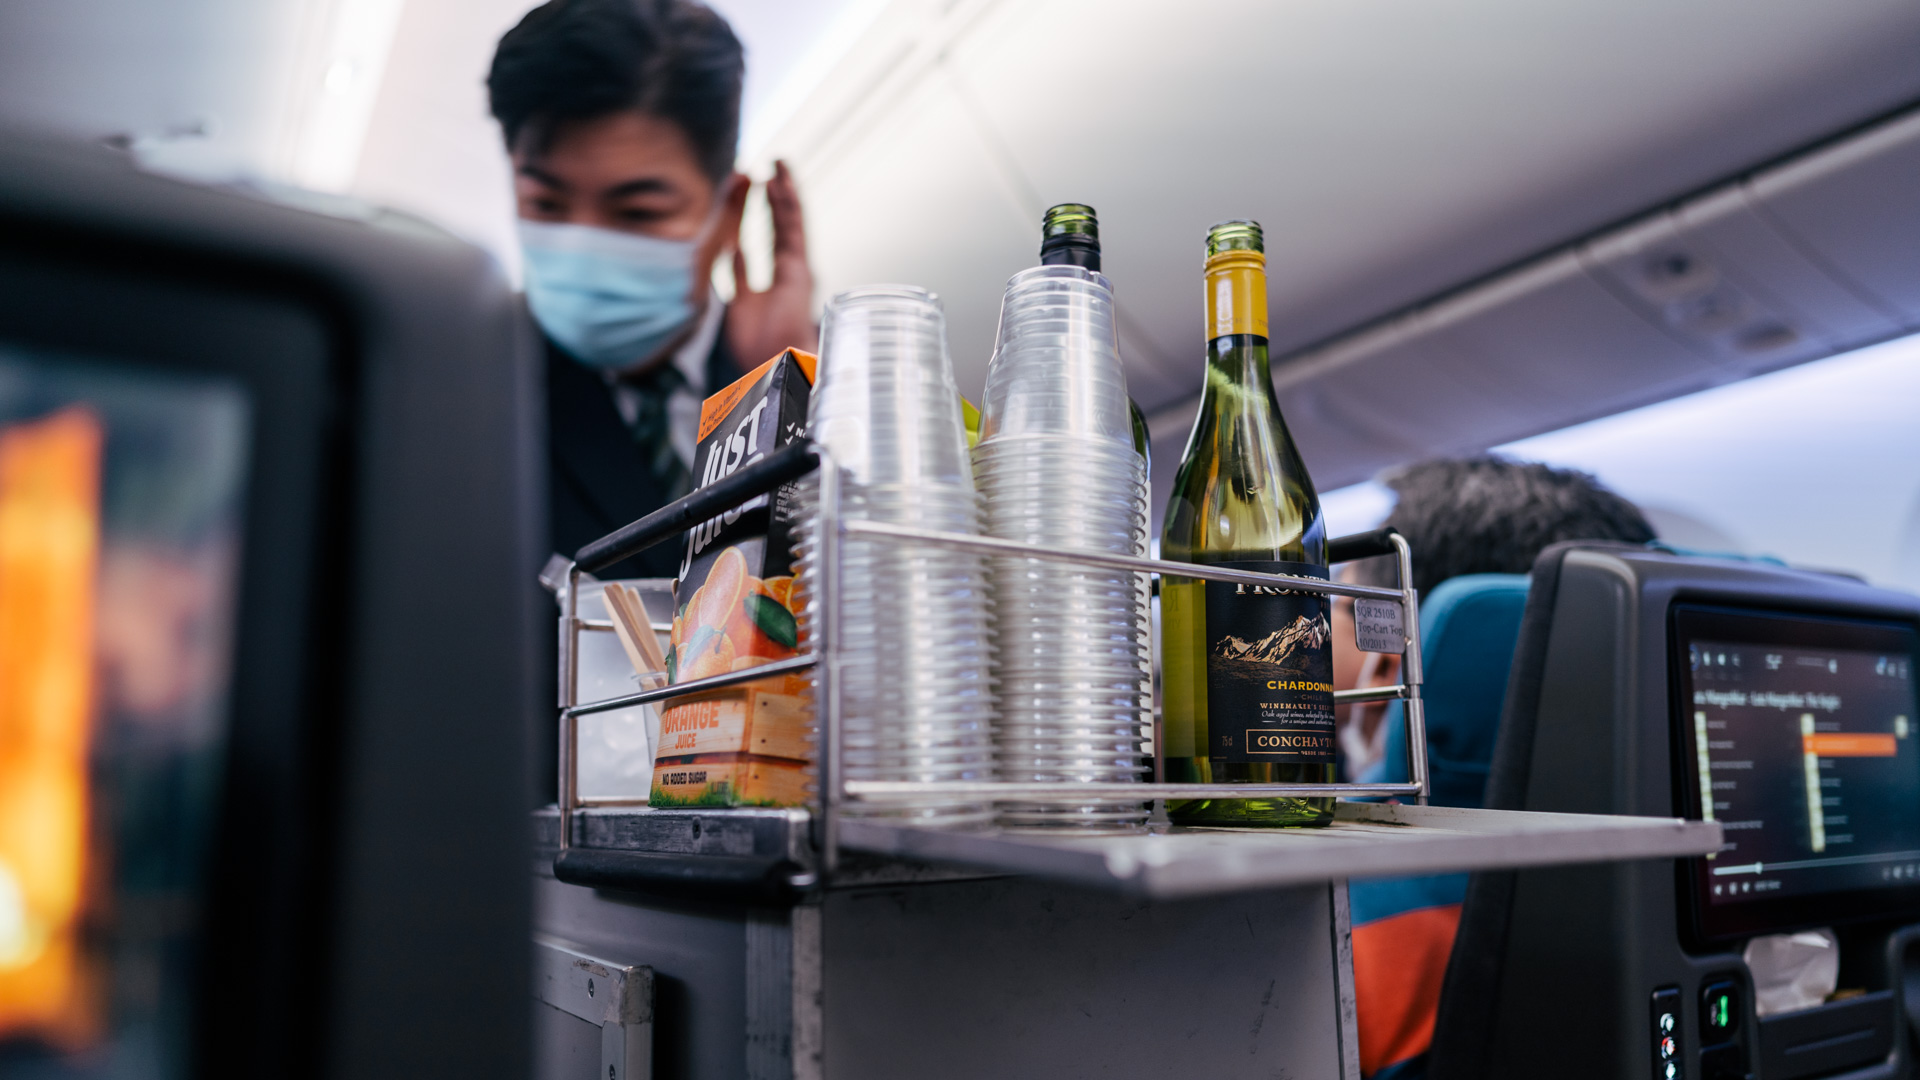 Singapore Airlines Boeing 787 Economy bar cart